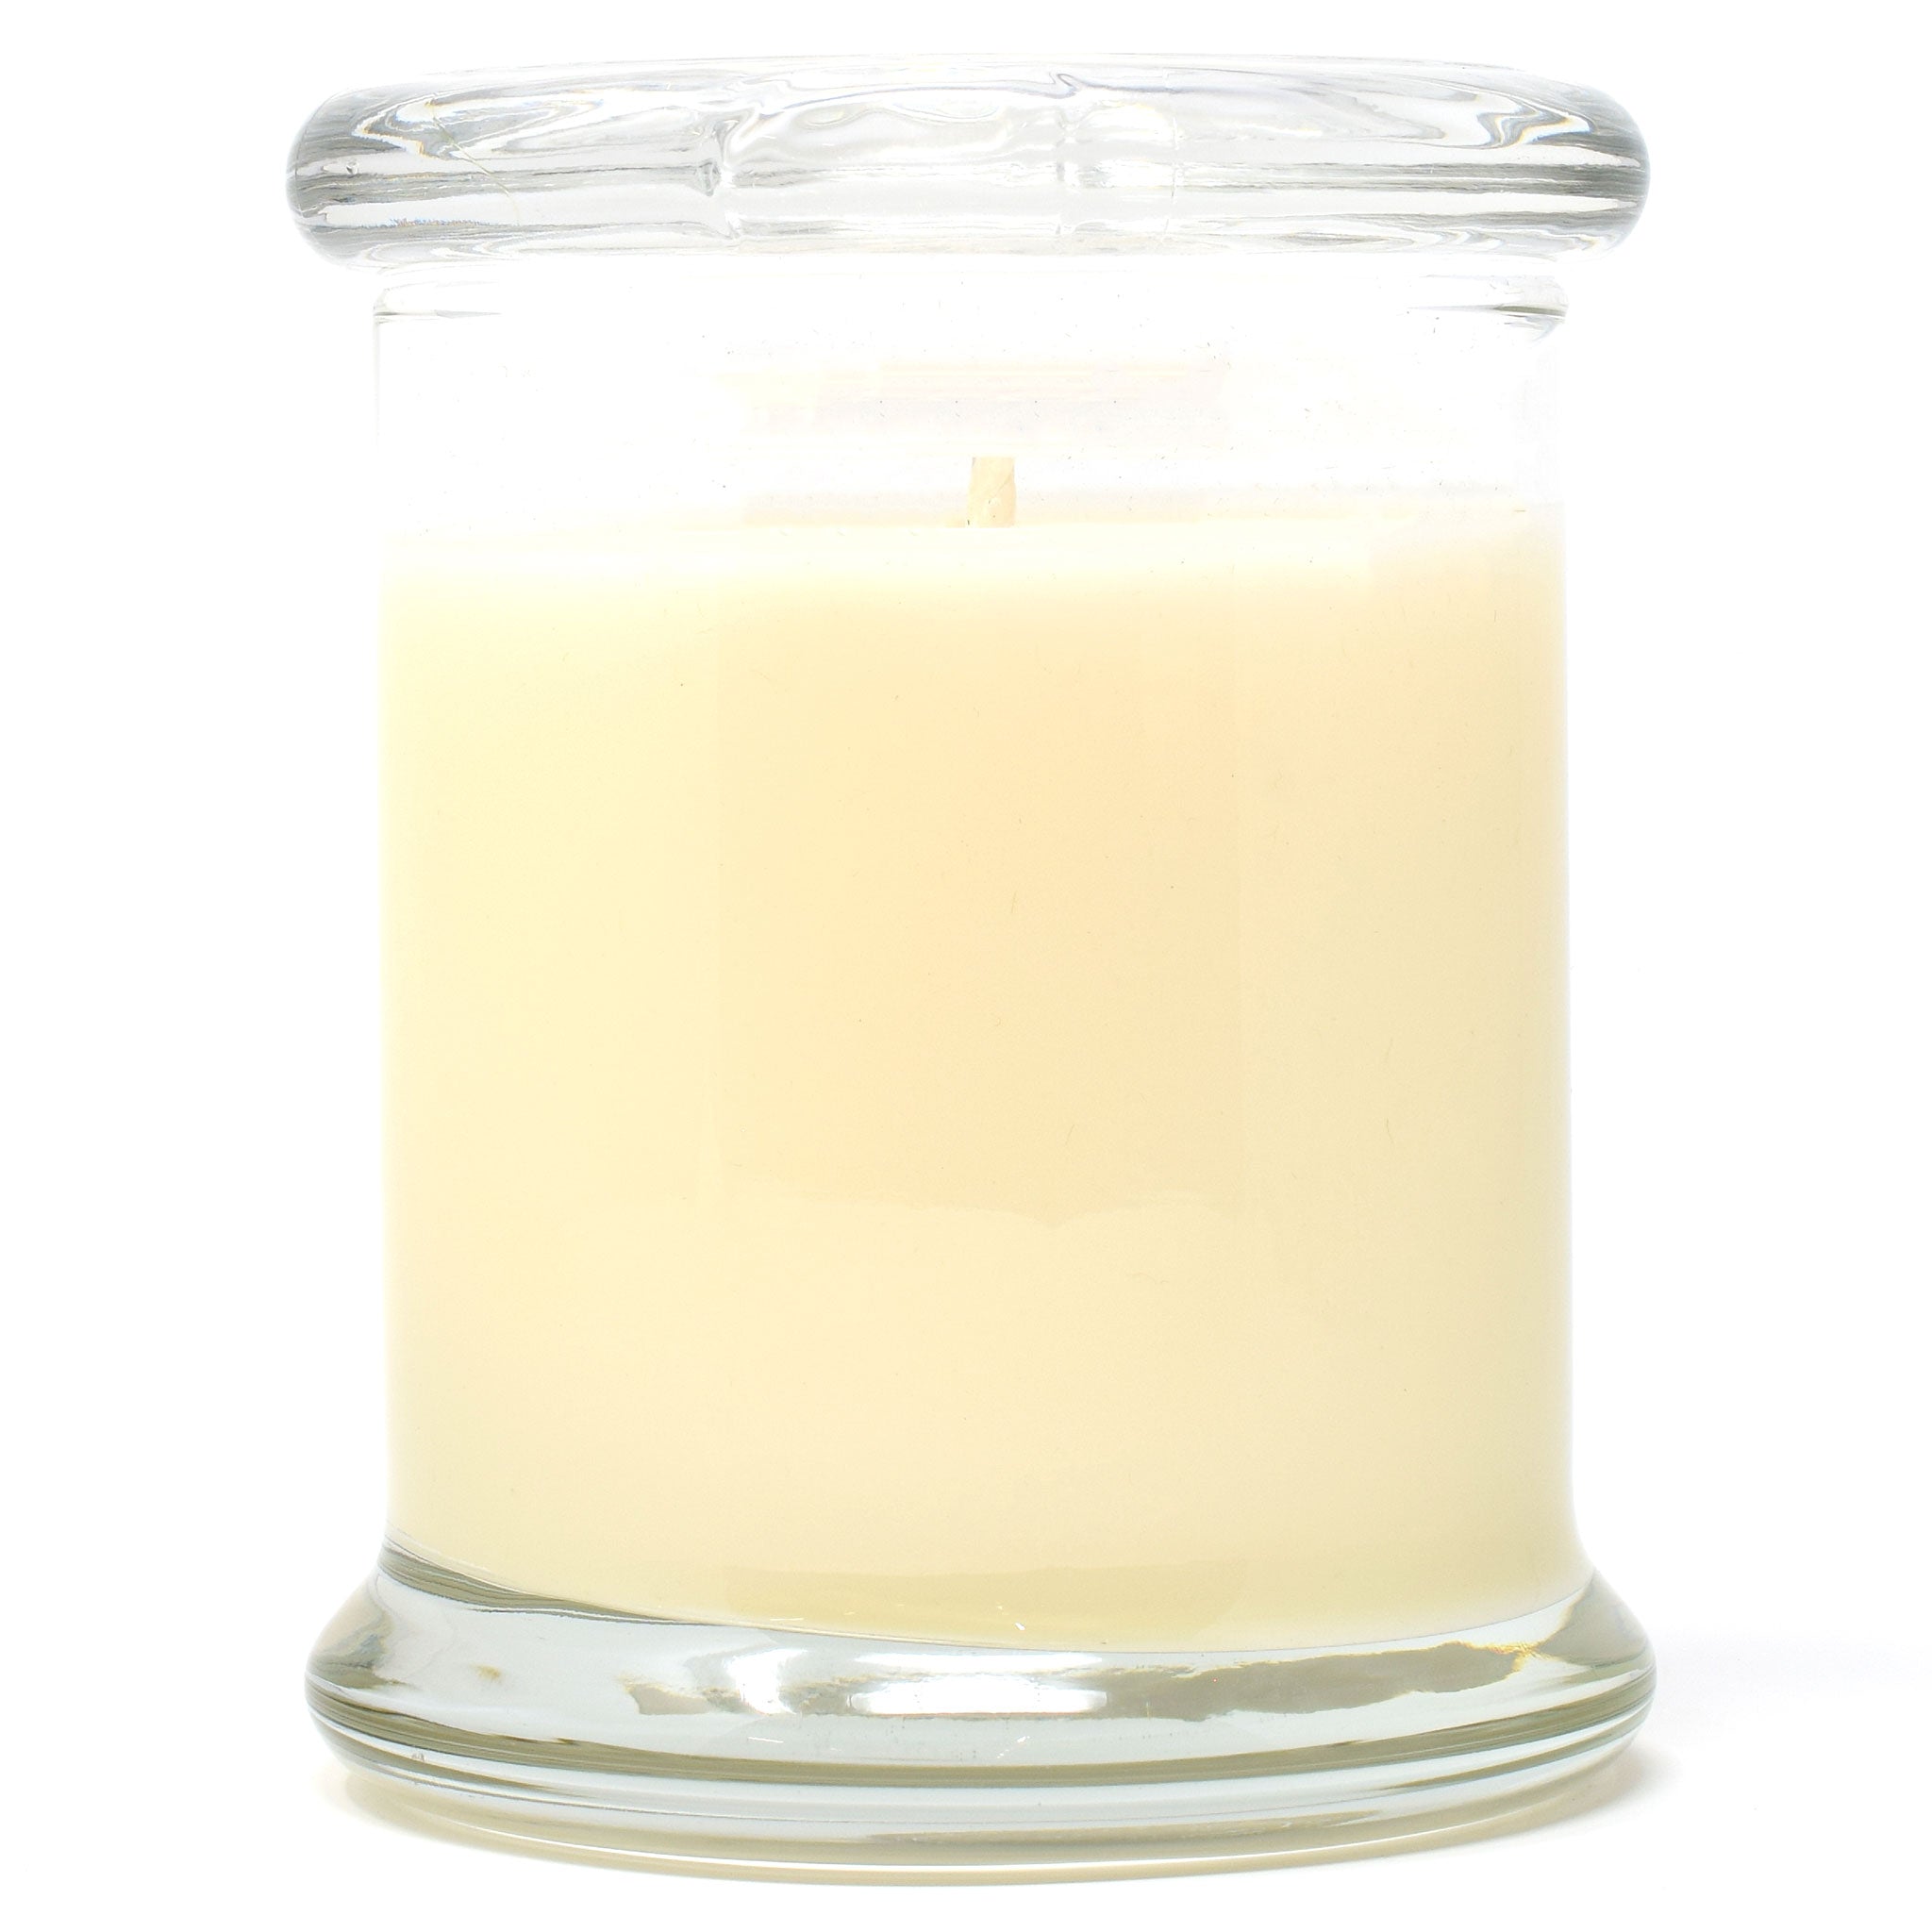 Buttercream Cake, 9oz Soy Candle Jar - Candeo Candle